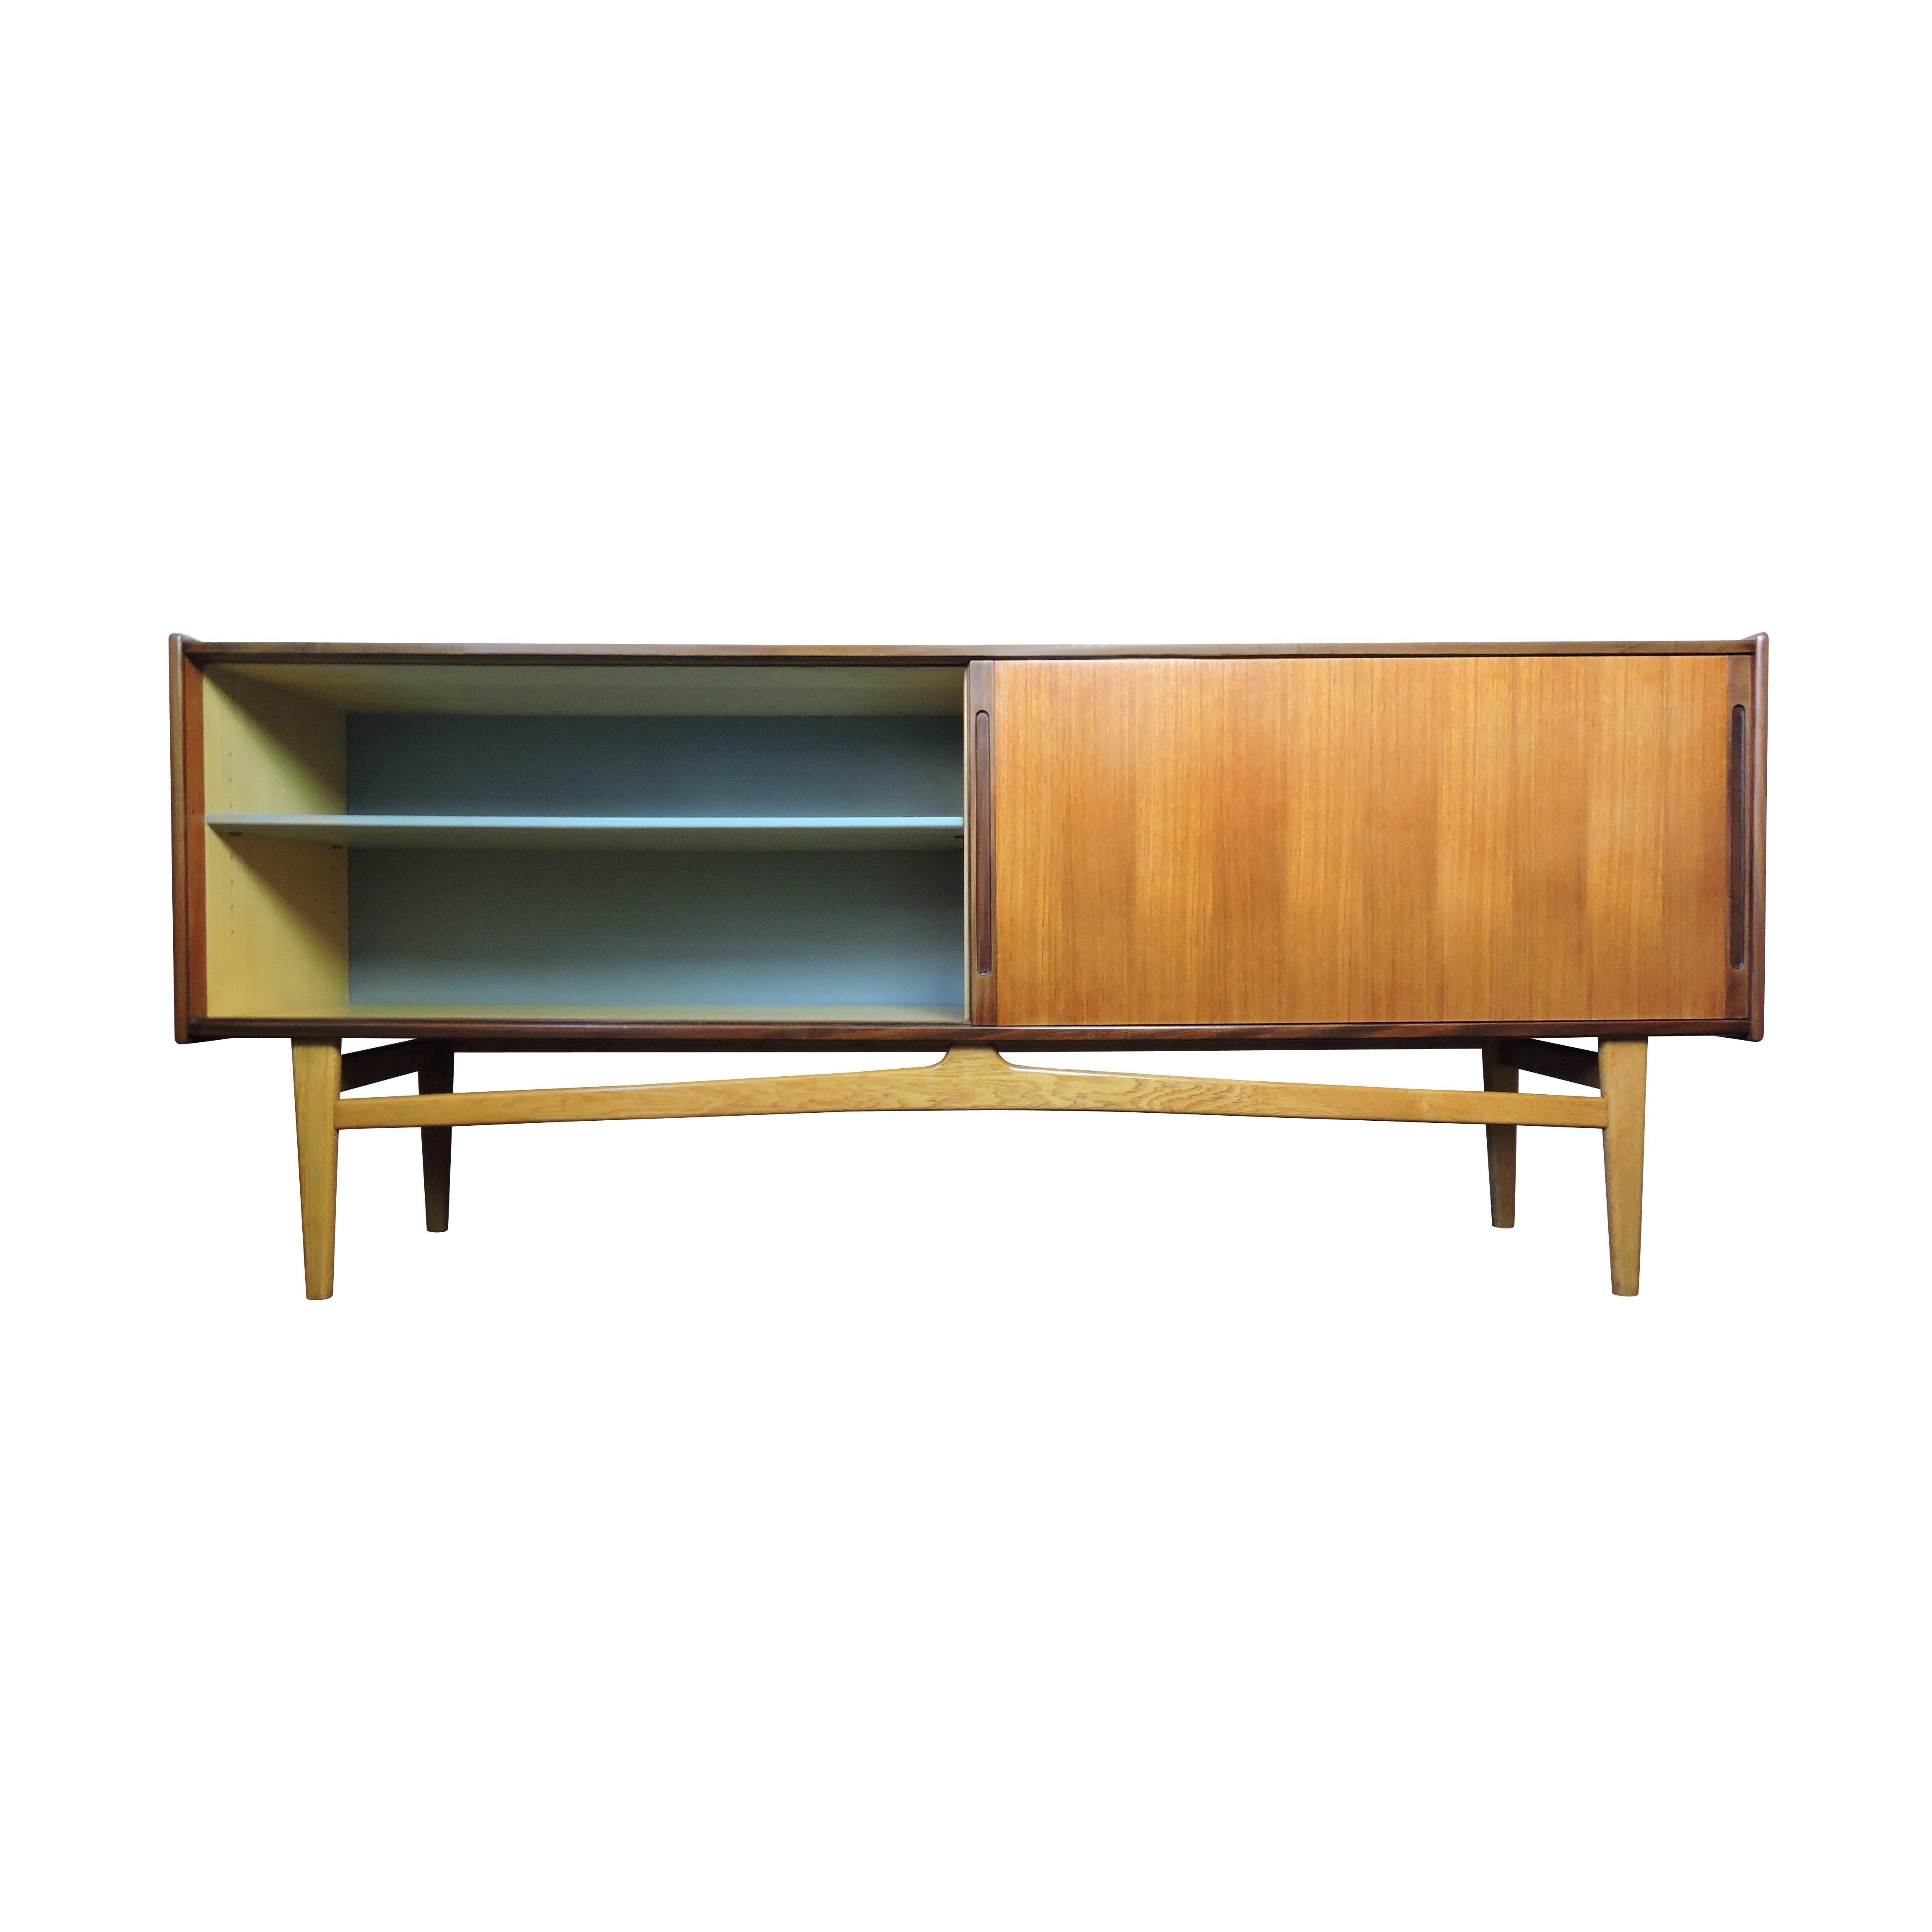 A Scandinavian teak sideboard made by Ulferts in the 1960s exclusively for Heals . Featuring multiple shelves and two drawers.